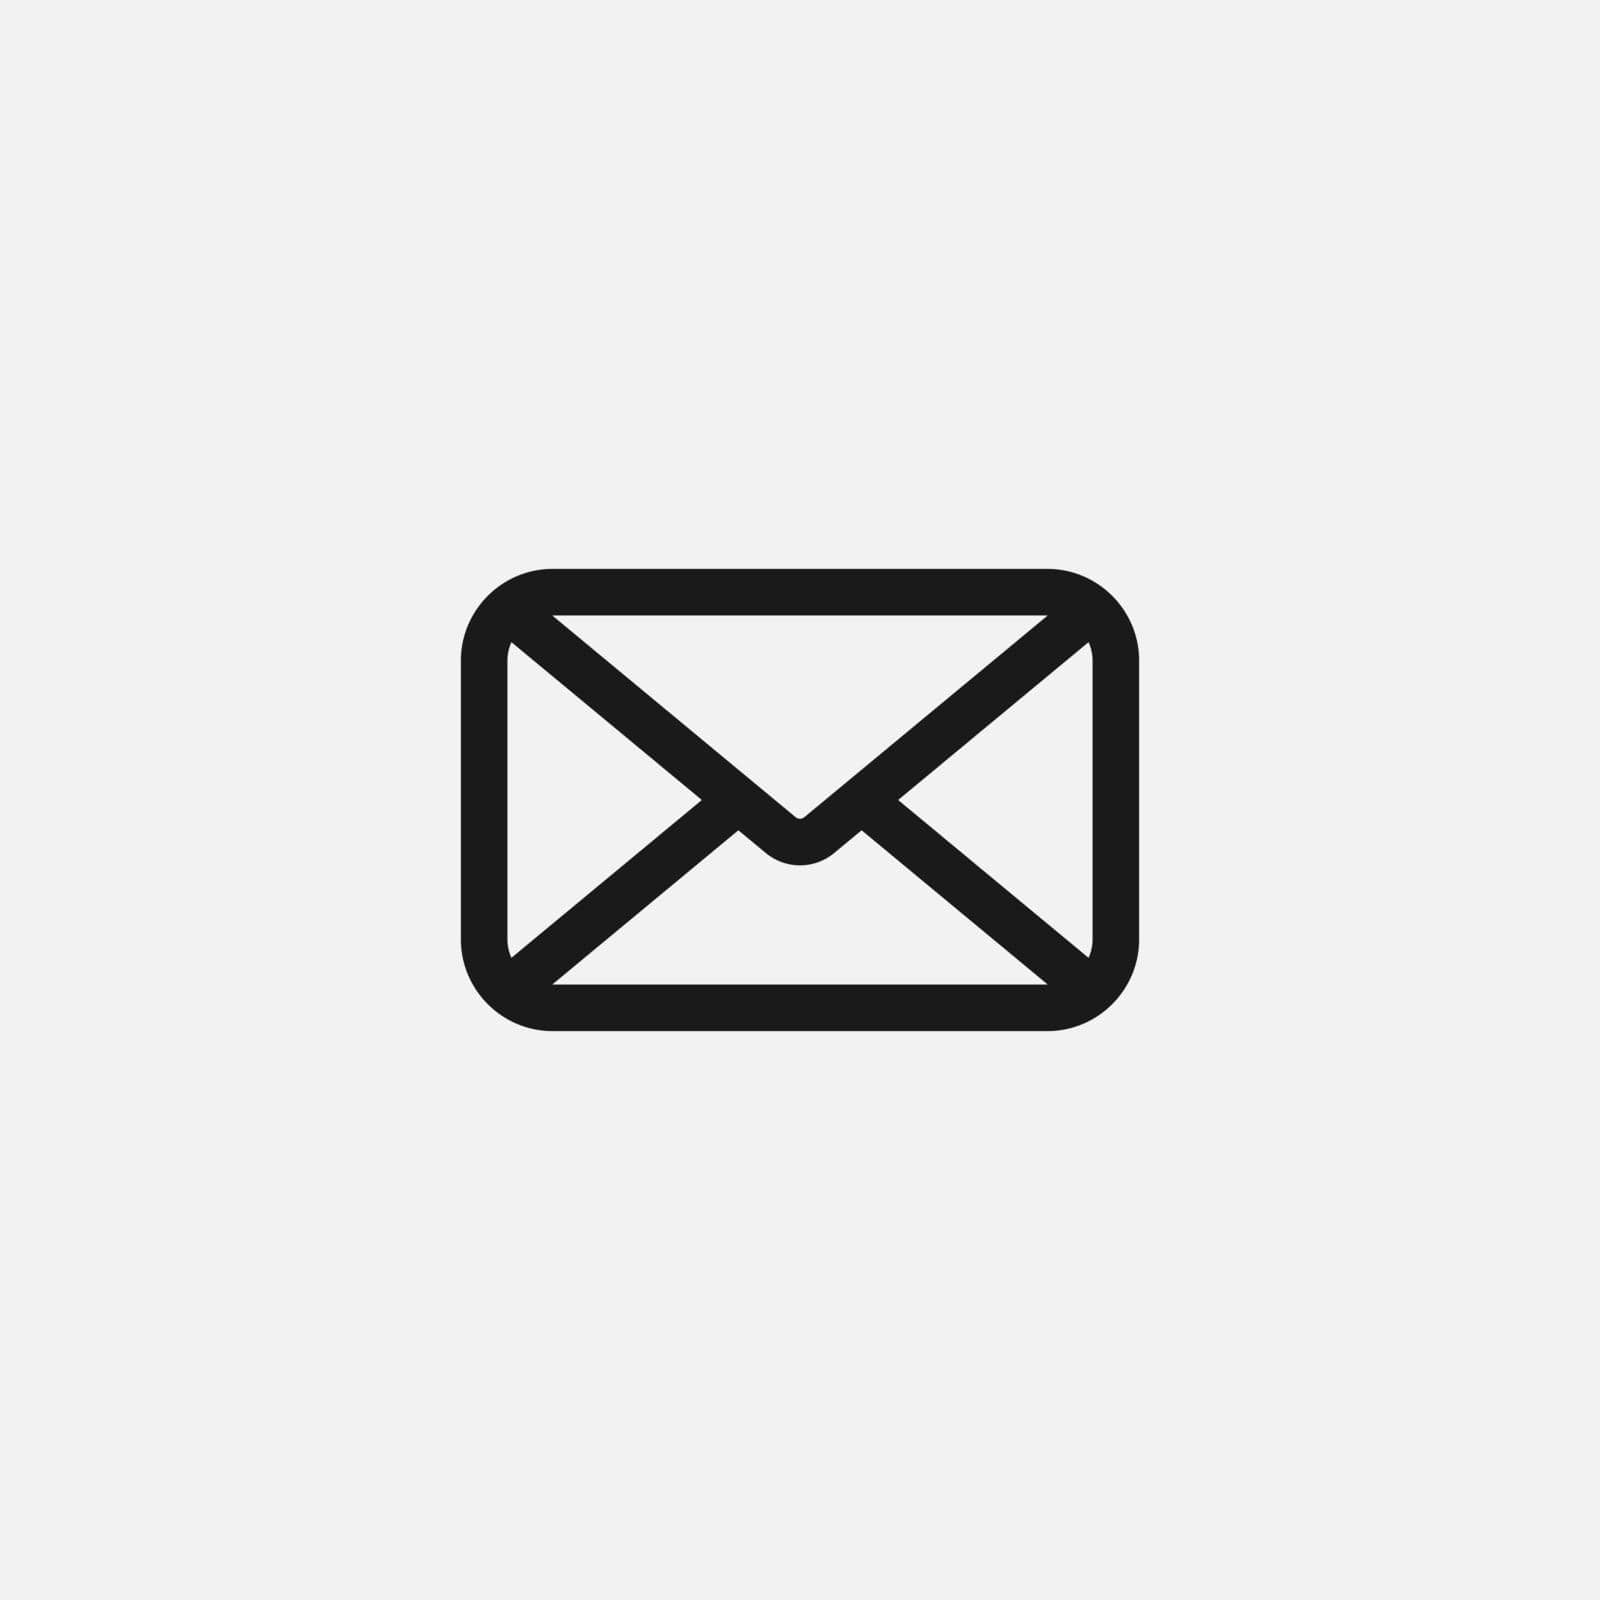 Mail icon in simple style. Envelope symbol Vector EPS 10